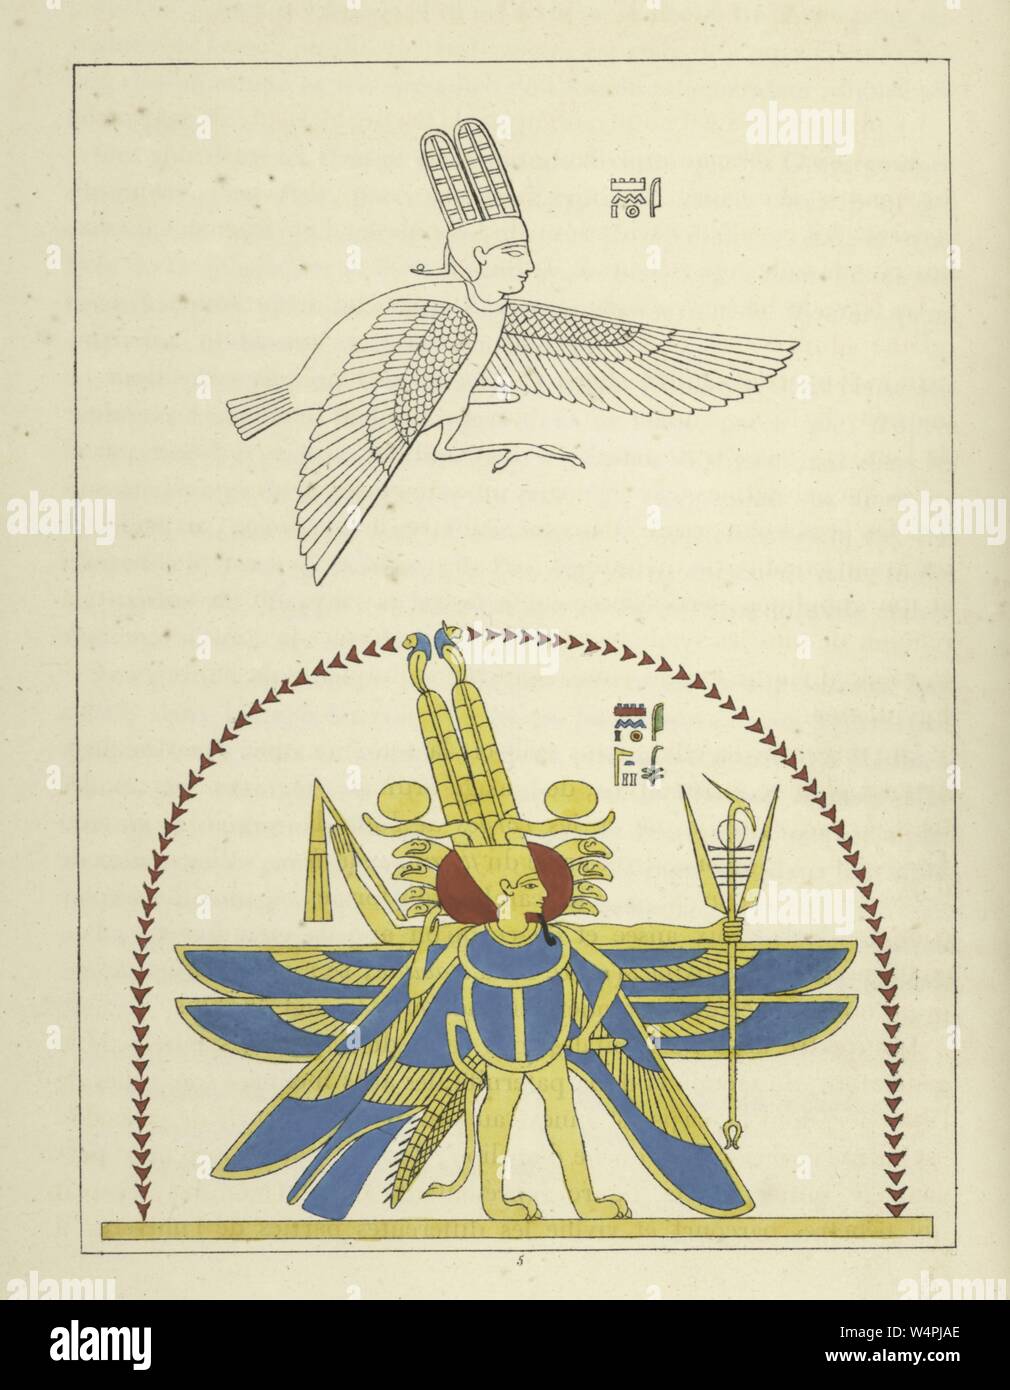 Ancient Egyptian god Amun-Ra, the King of Gods, champion of the poor and troubled, illustration from the book 'Pantheon Egyptien' by Leon Jean Joseph Dubois, 1824. From the New York Public Library. () Stock Photo